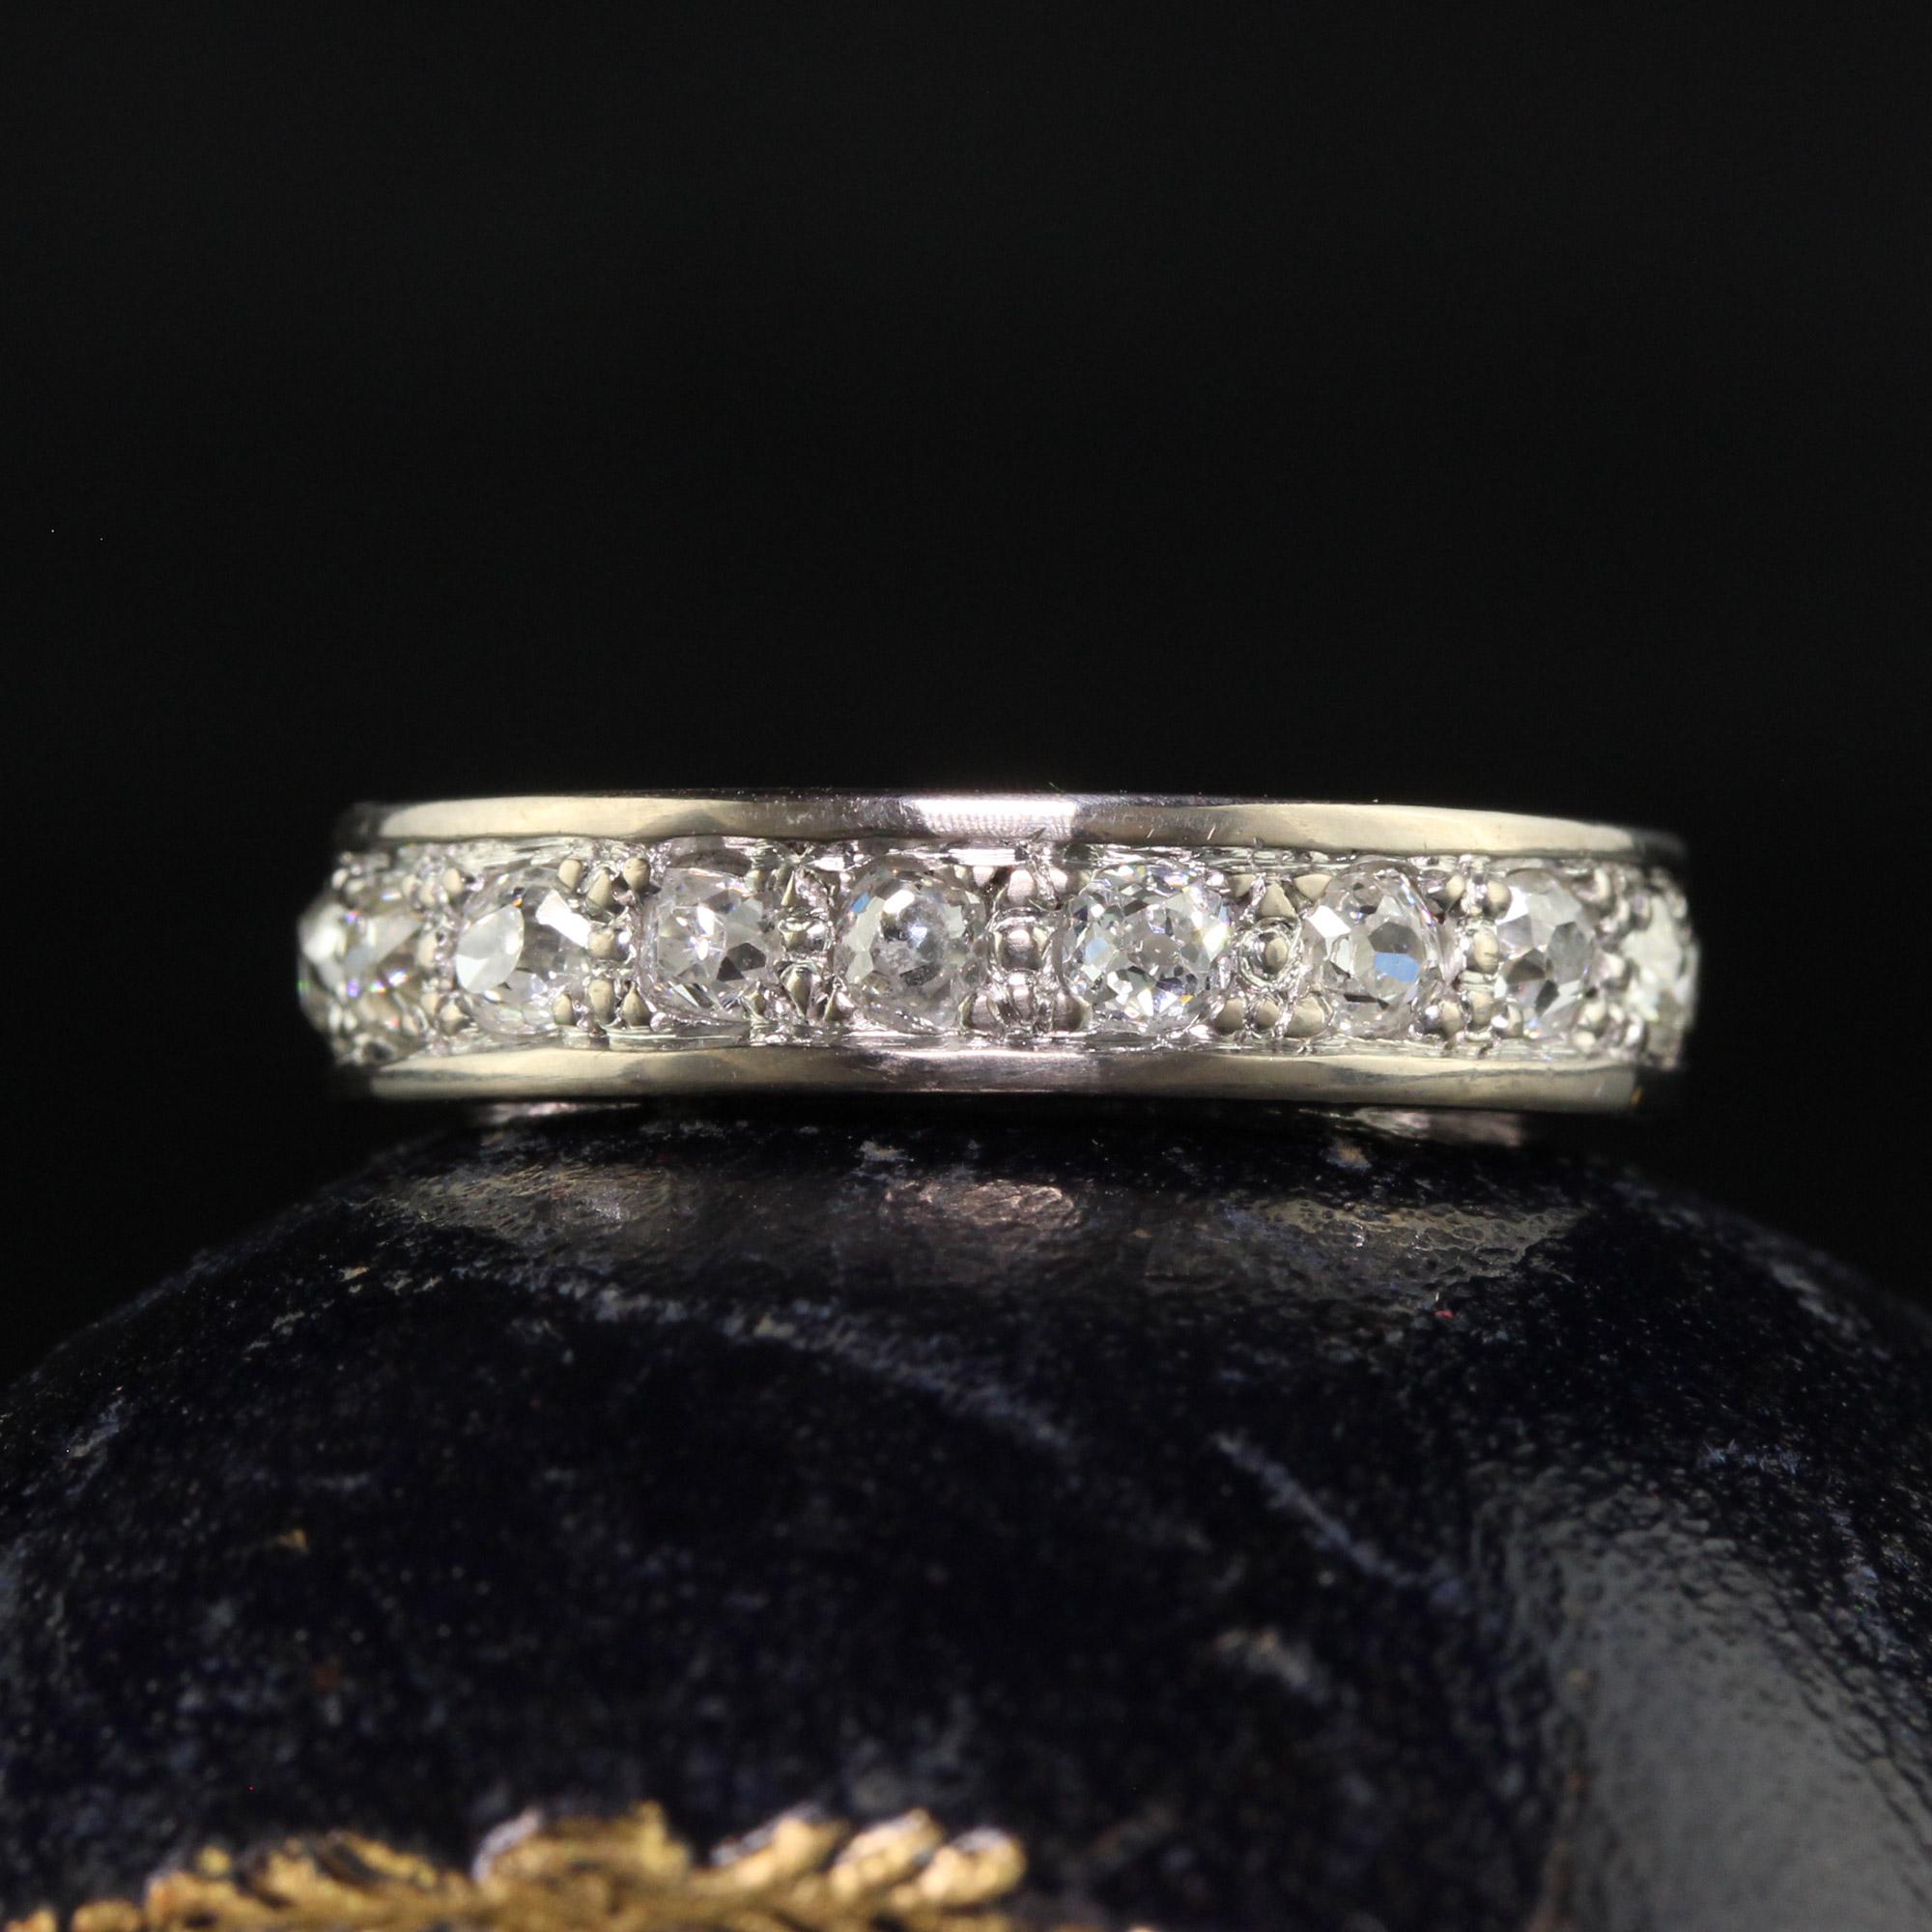 Beautiful Antique Art Deco Platinum and 18K White Gold French Old Mine Diamond Eternity Band - Size 4 3/4. This gorgeous art deco eternity band is crafted in platinum and 18K White Gold. There are old mine cut diamonds going around the entire band.